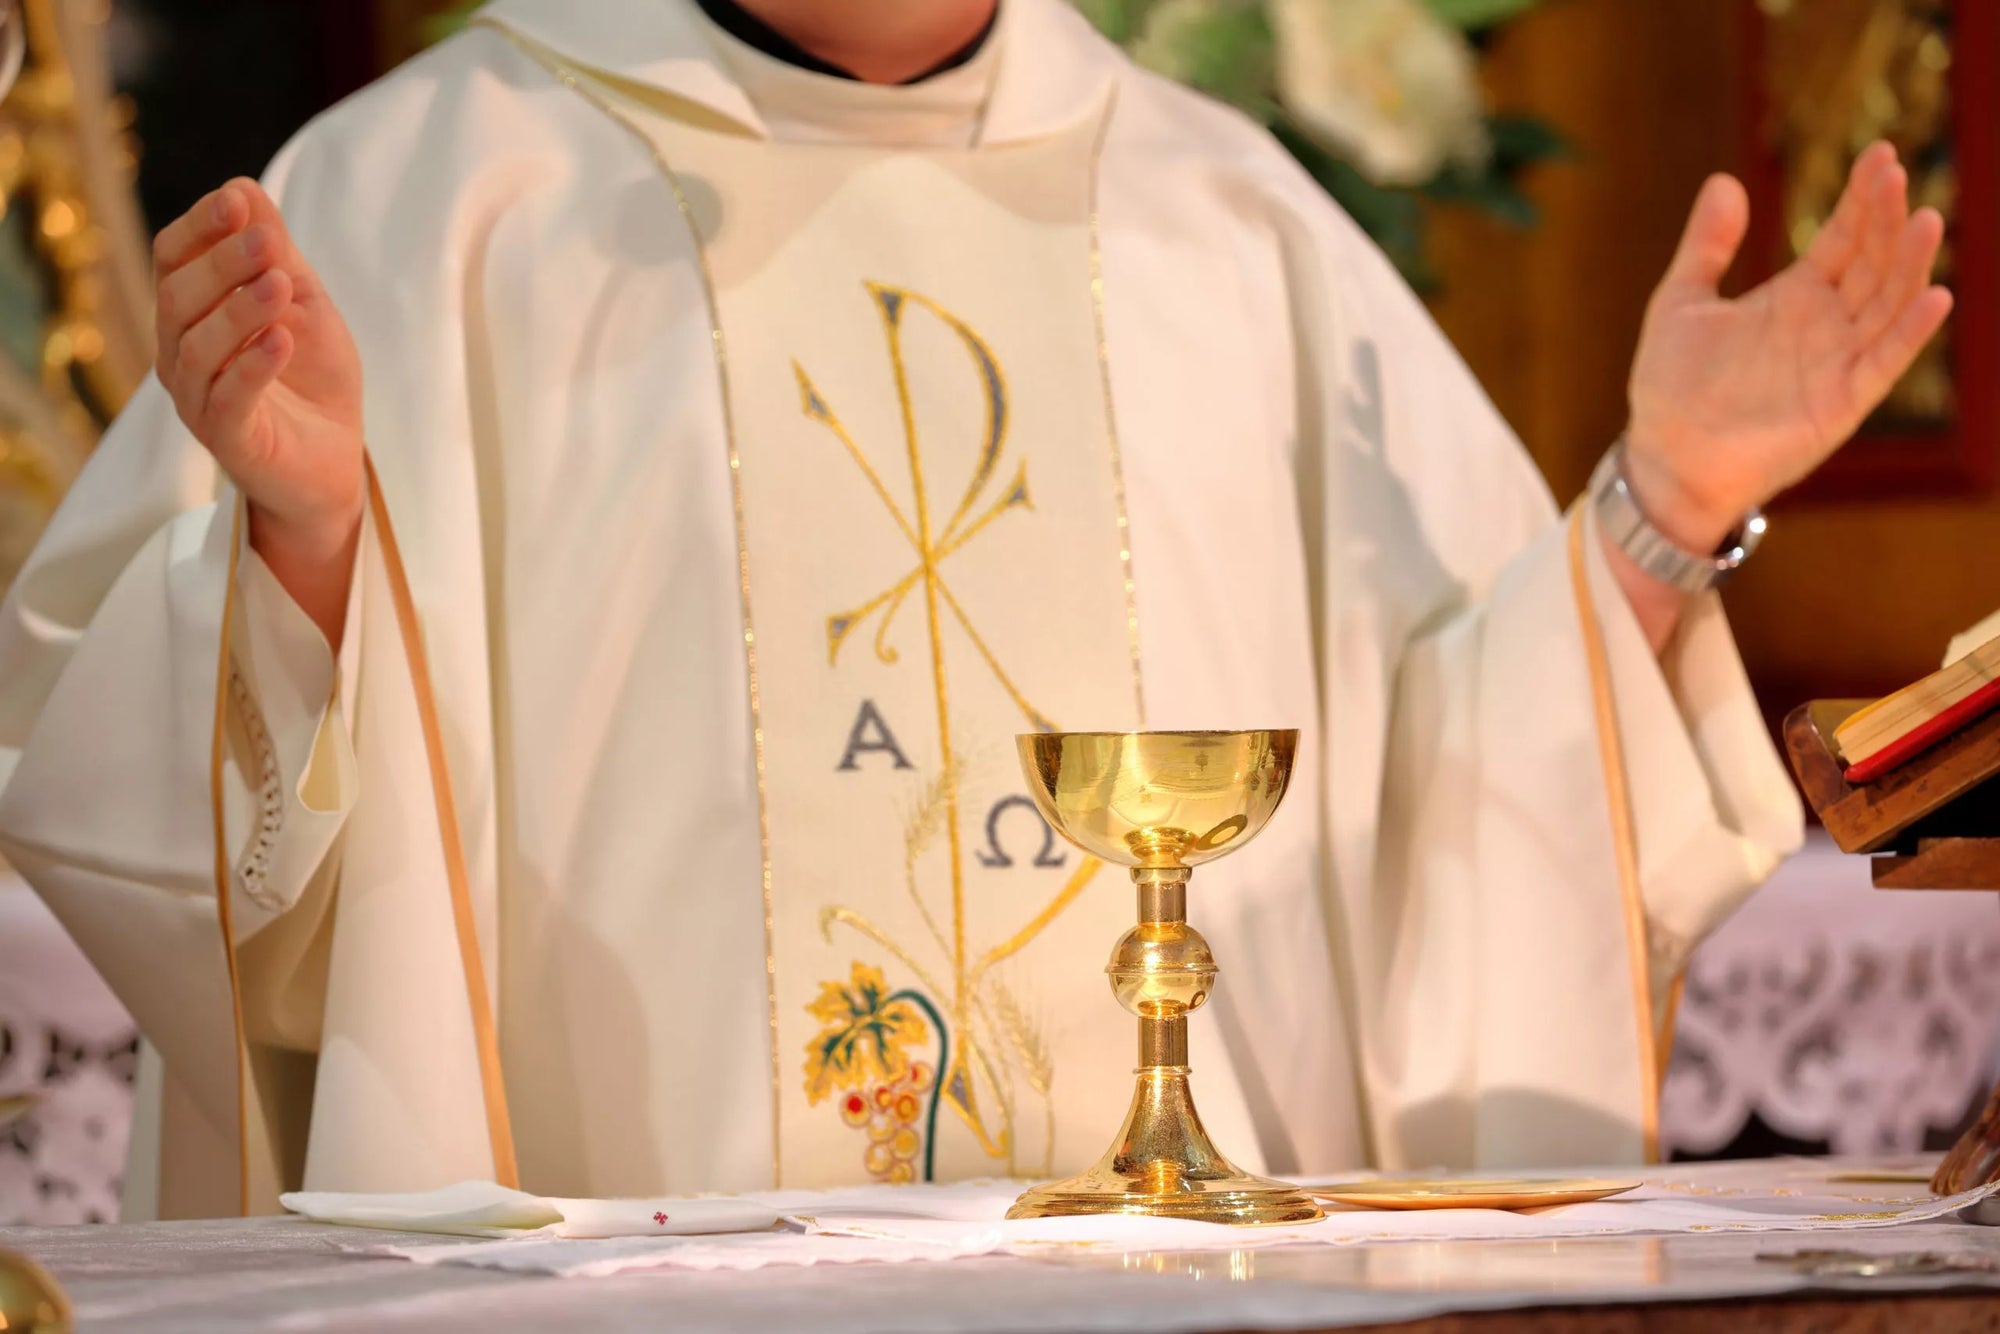 10 things you didn’t know about Catholic priests